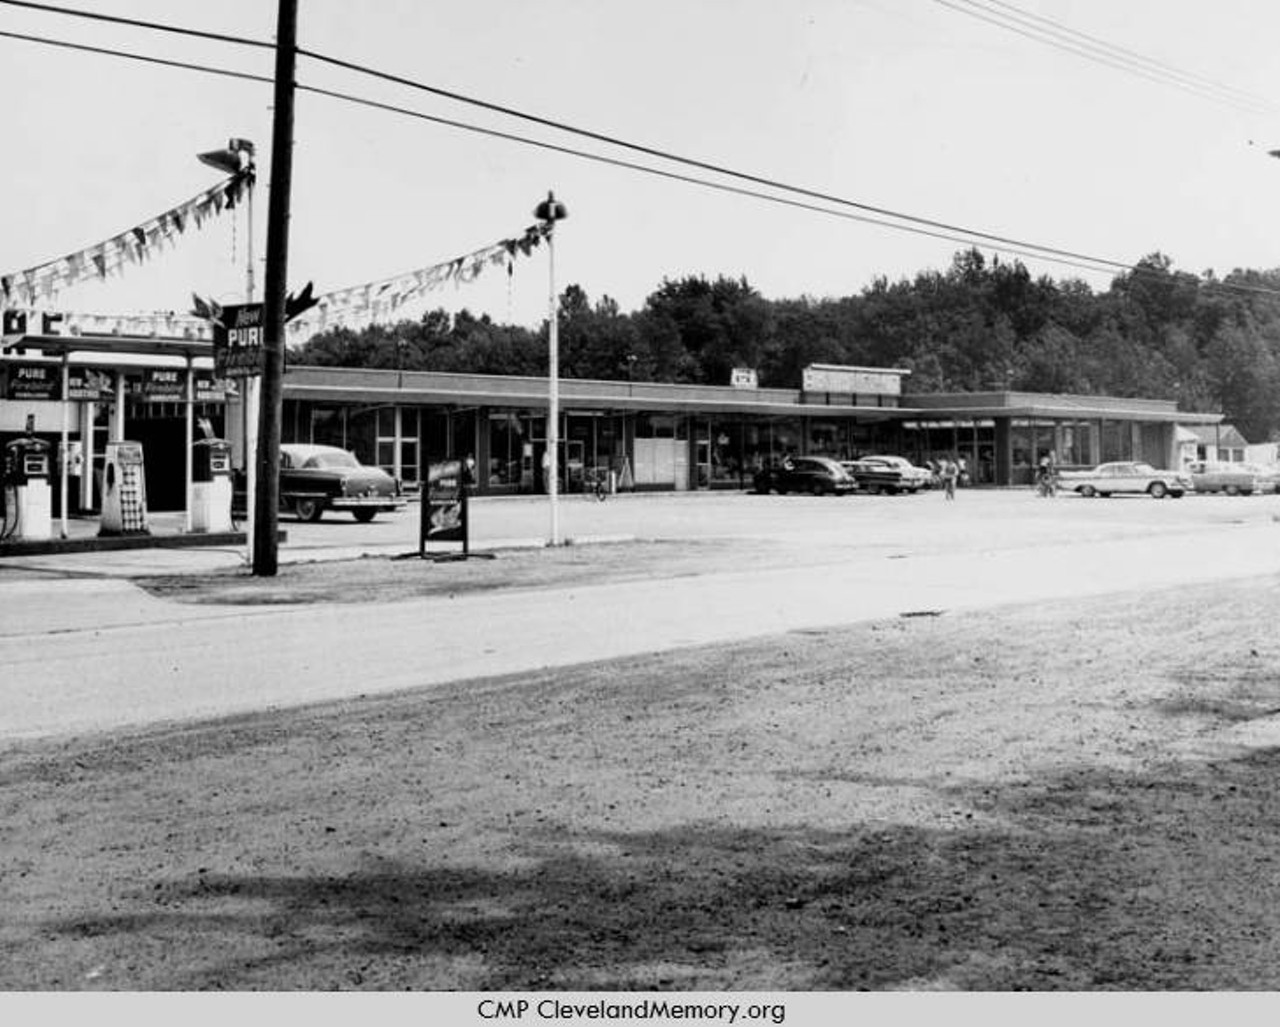  Gas Station and Strip Mall, 1961 